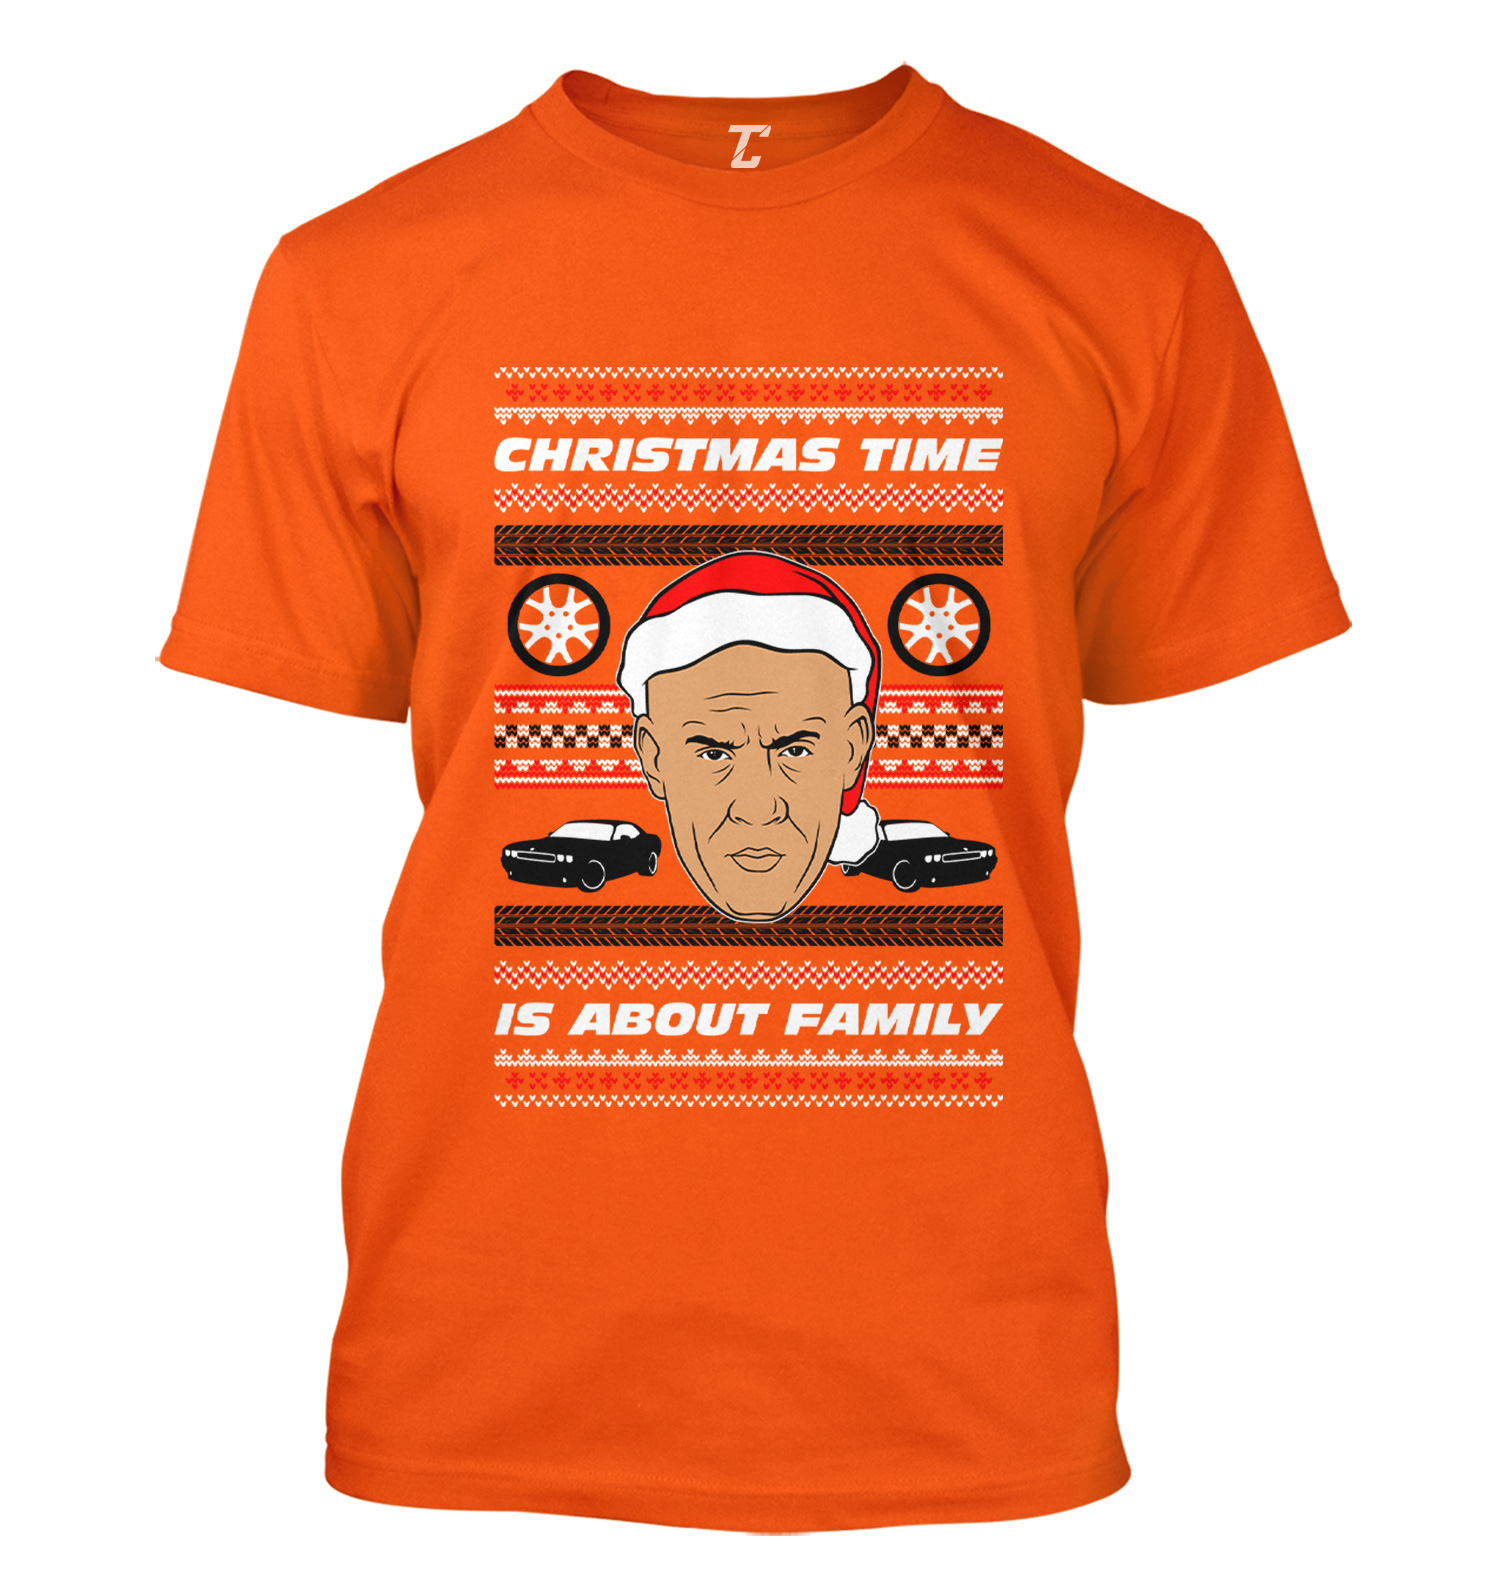 Christmas Time Is About Family - Furious Dom Toretto Men\'s T-shirt | eBay